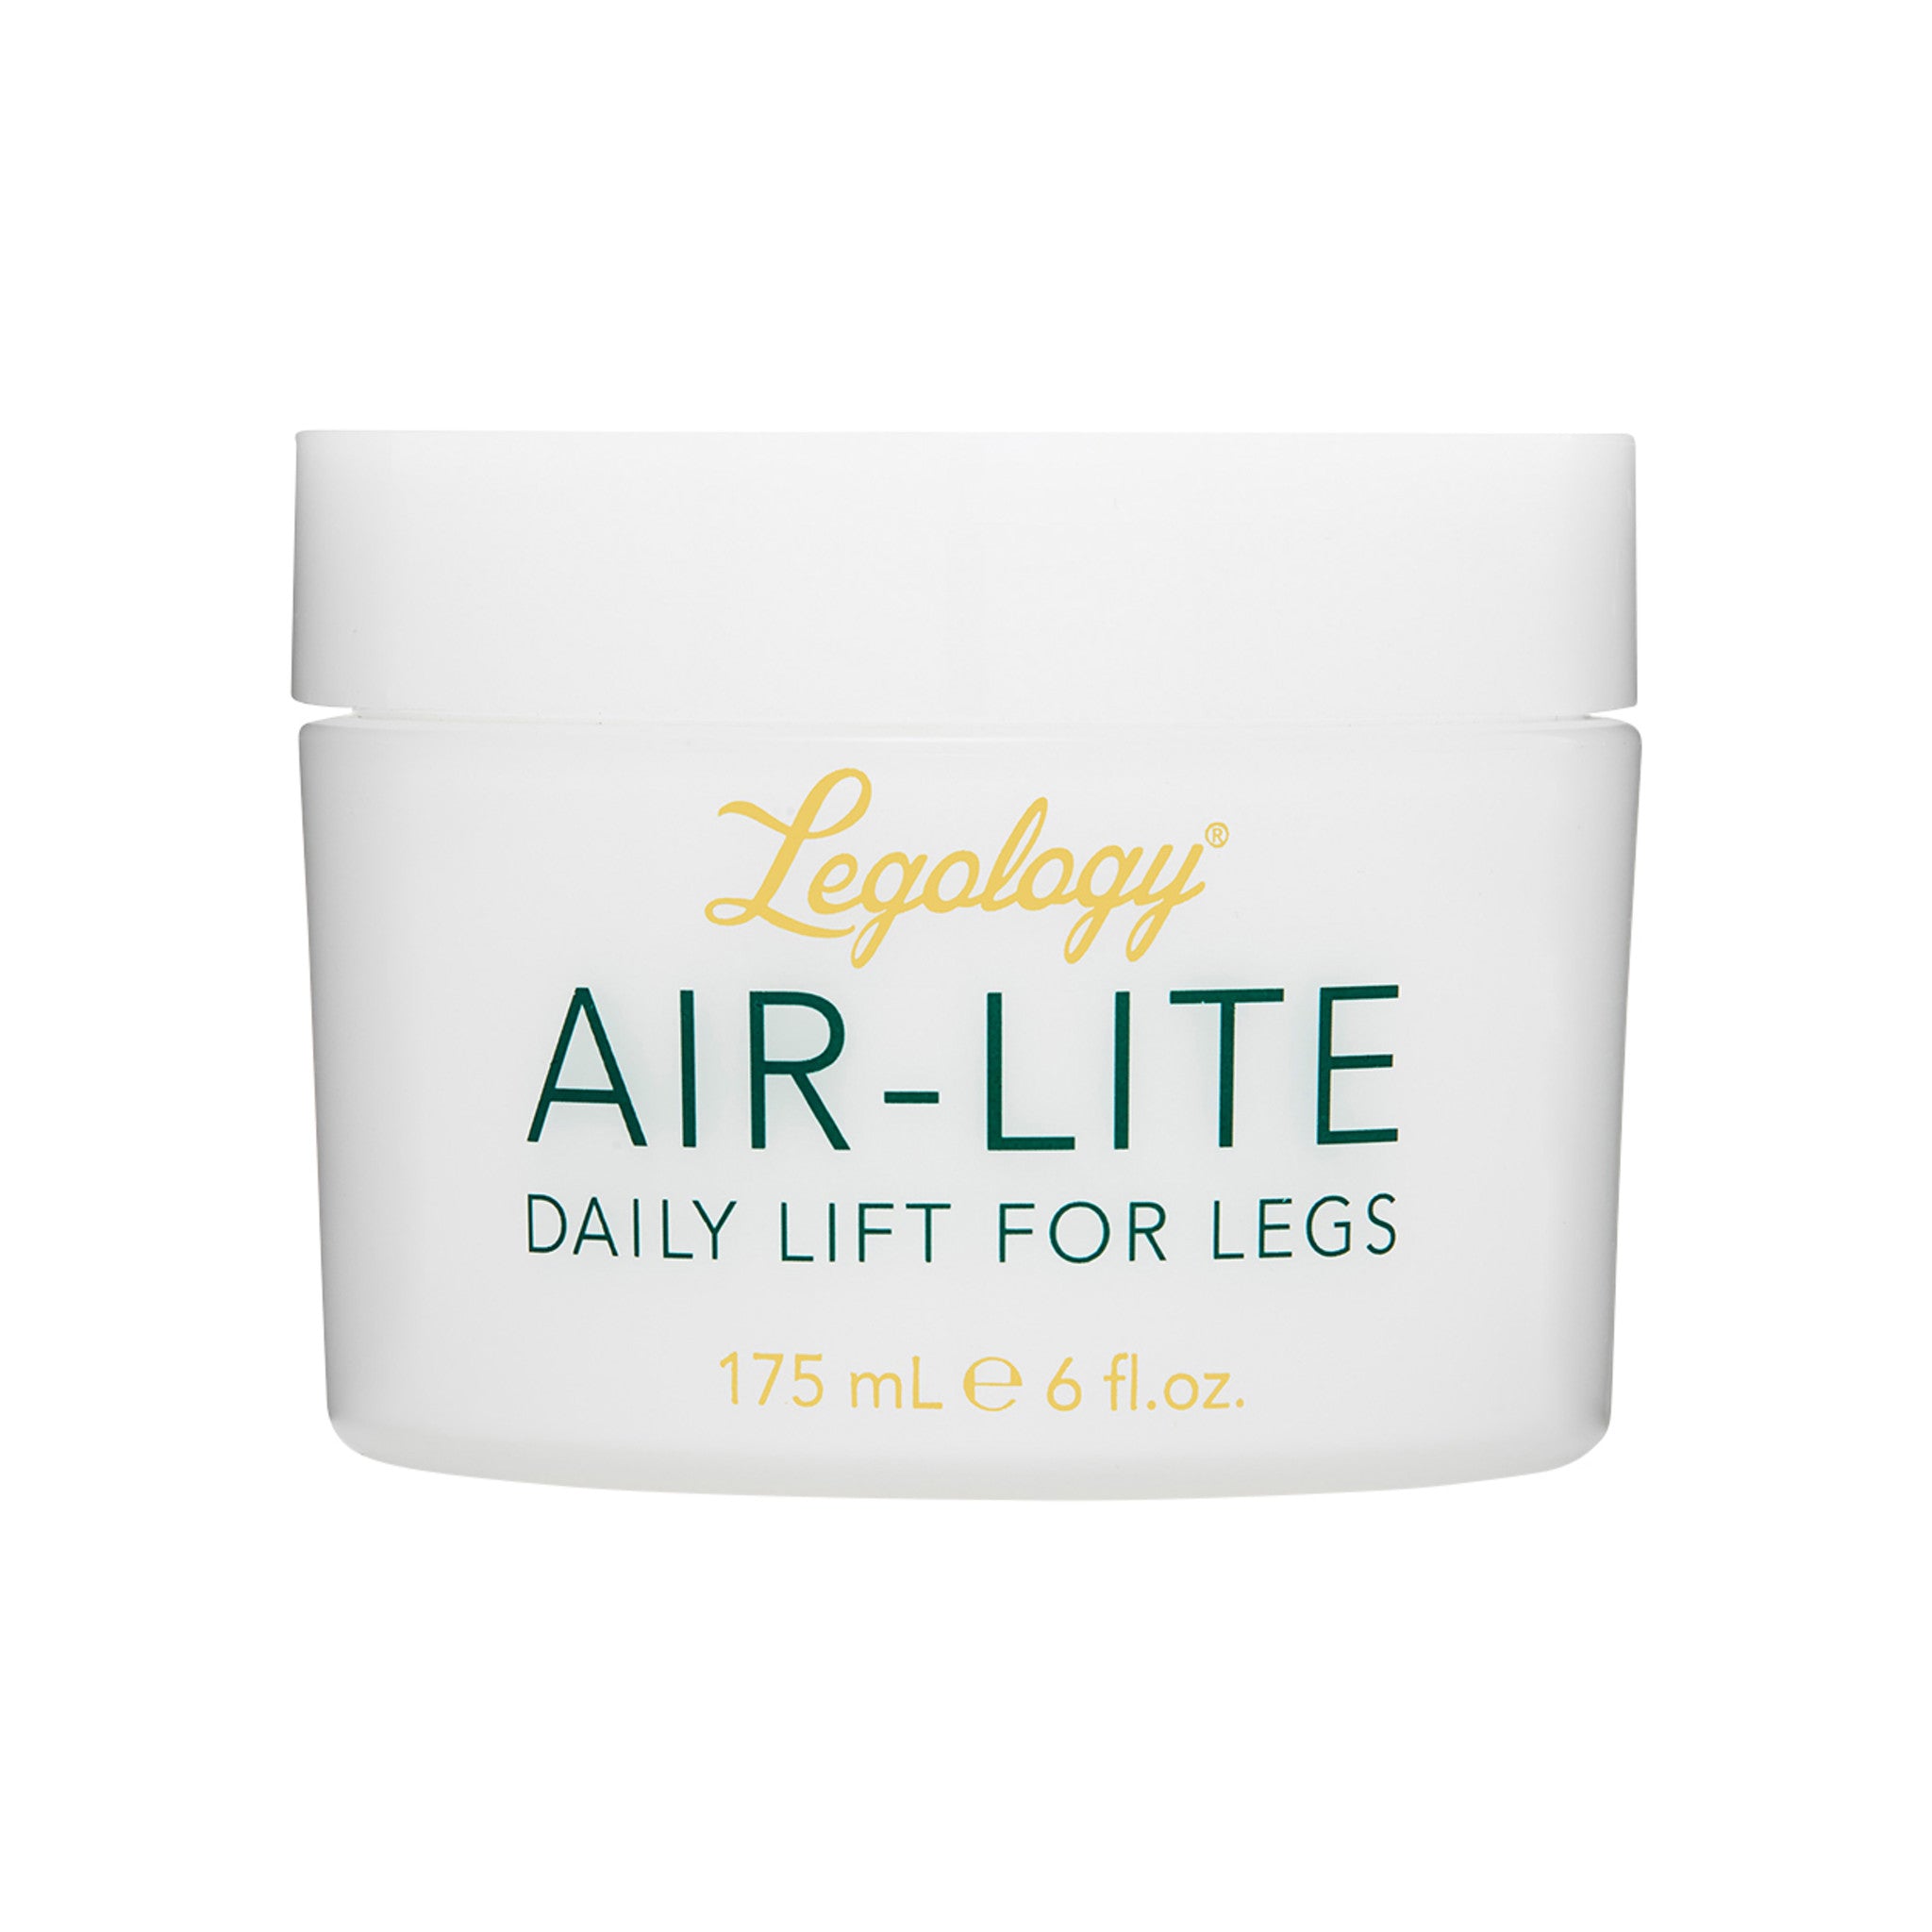 Air-Lite Daily Lift for Legs main image.